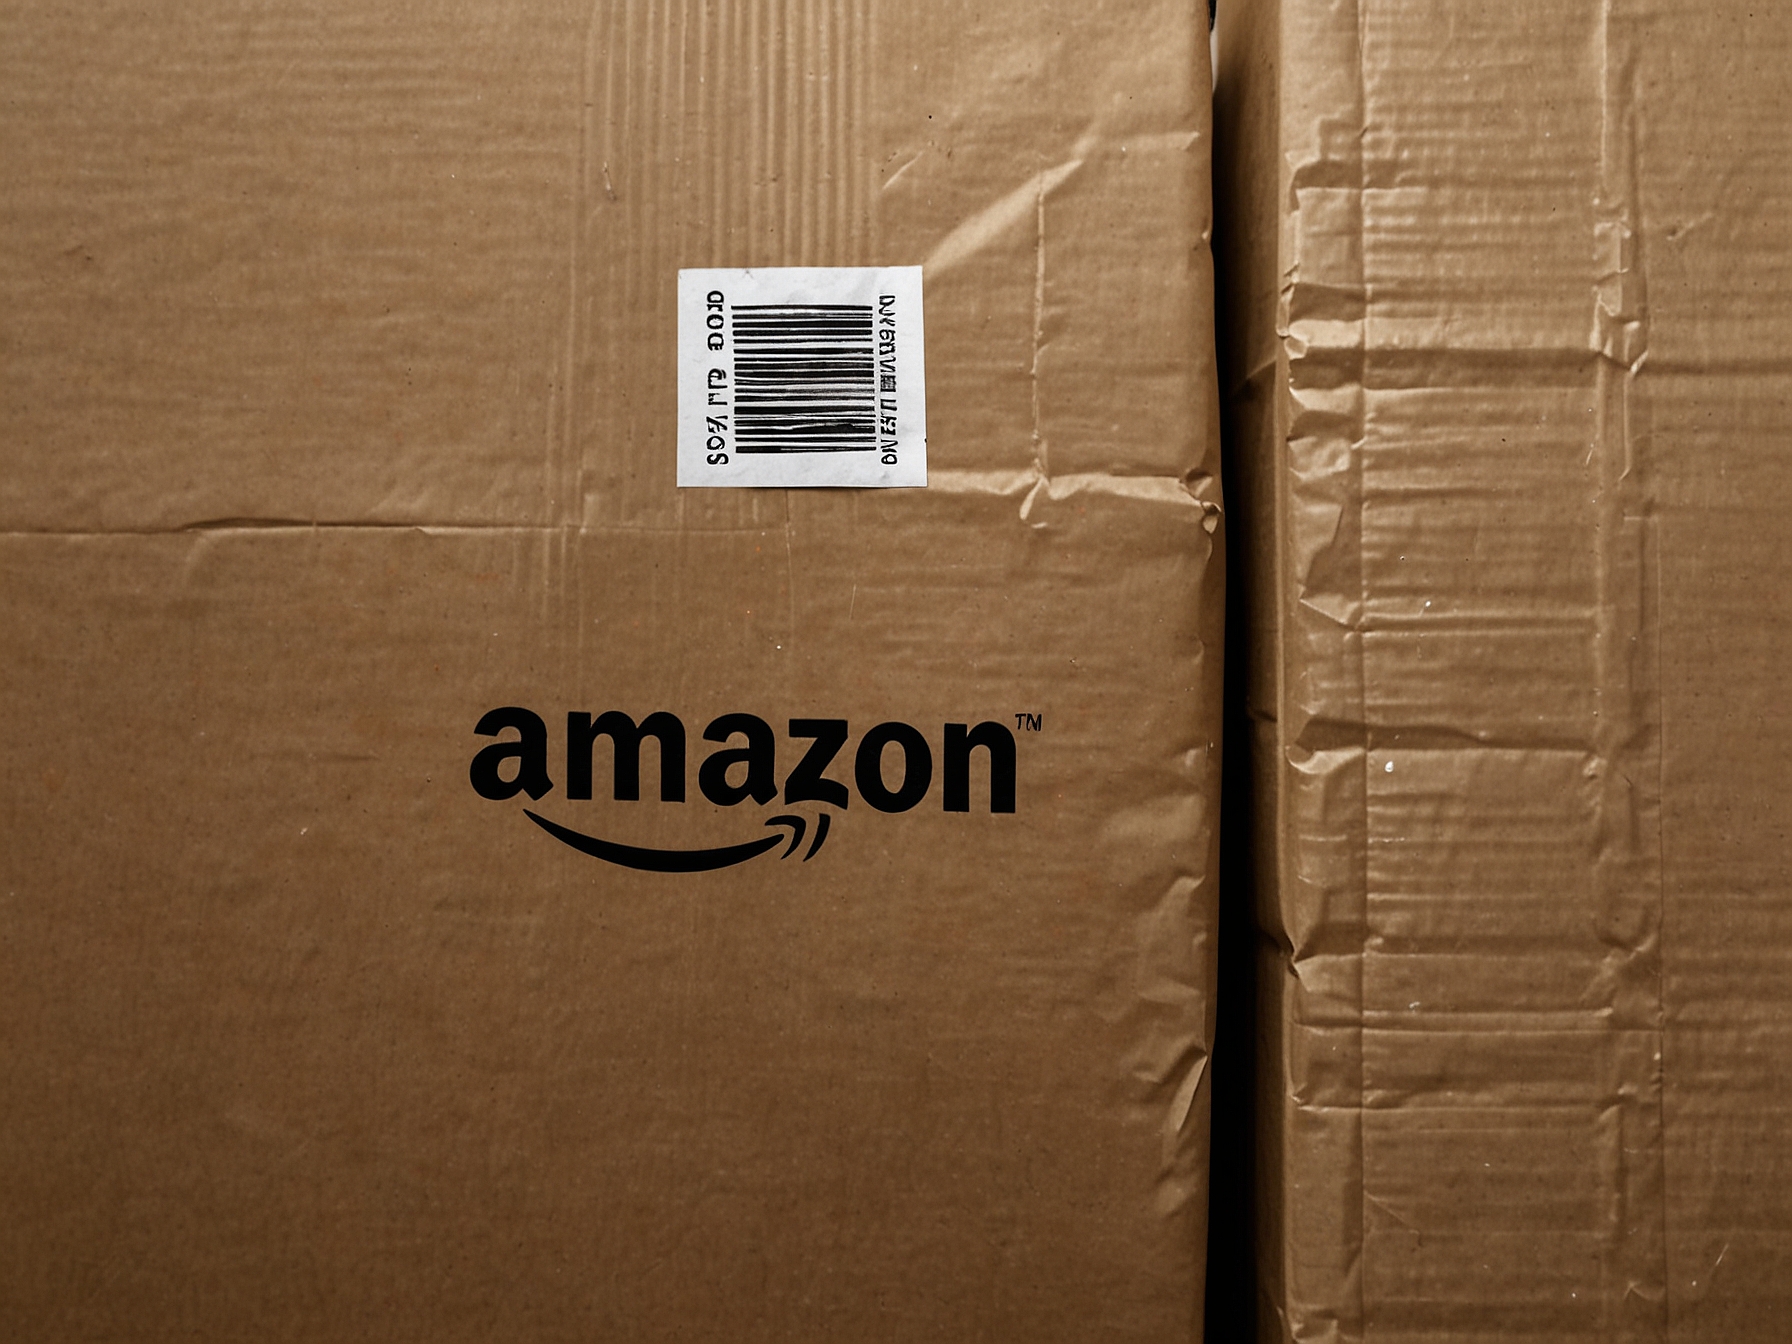 A close-up of a delivery package filled with crumpled paper, demonstrating Amazon's effort to reduce plastic waste and promote recyclable materials in its packaging solutions.